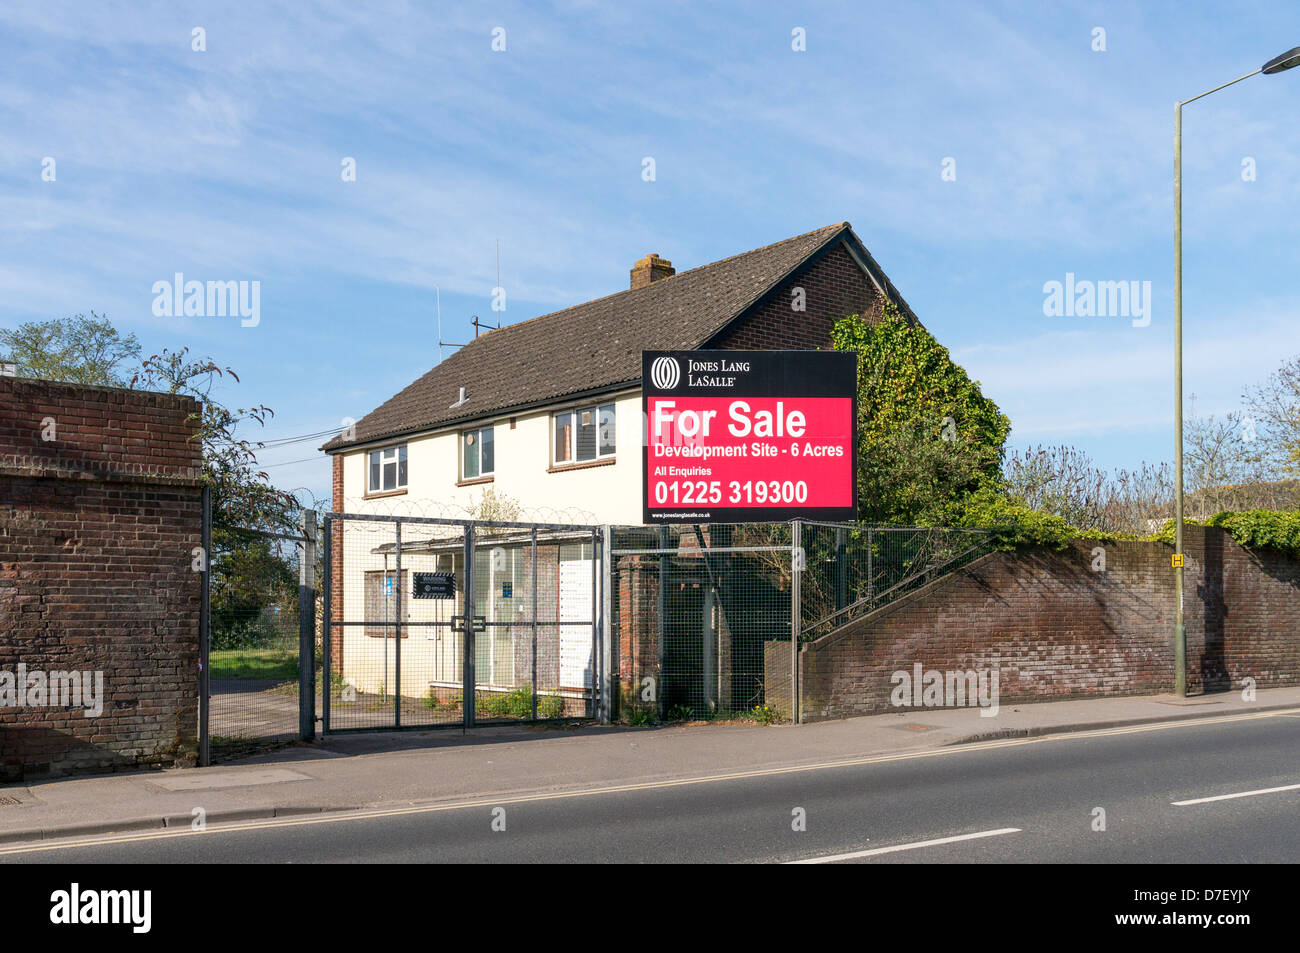 Large sign at the side of a UK road advertising a plot of land for sale for development Stock Photo